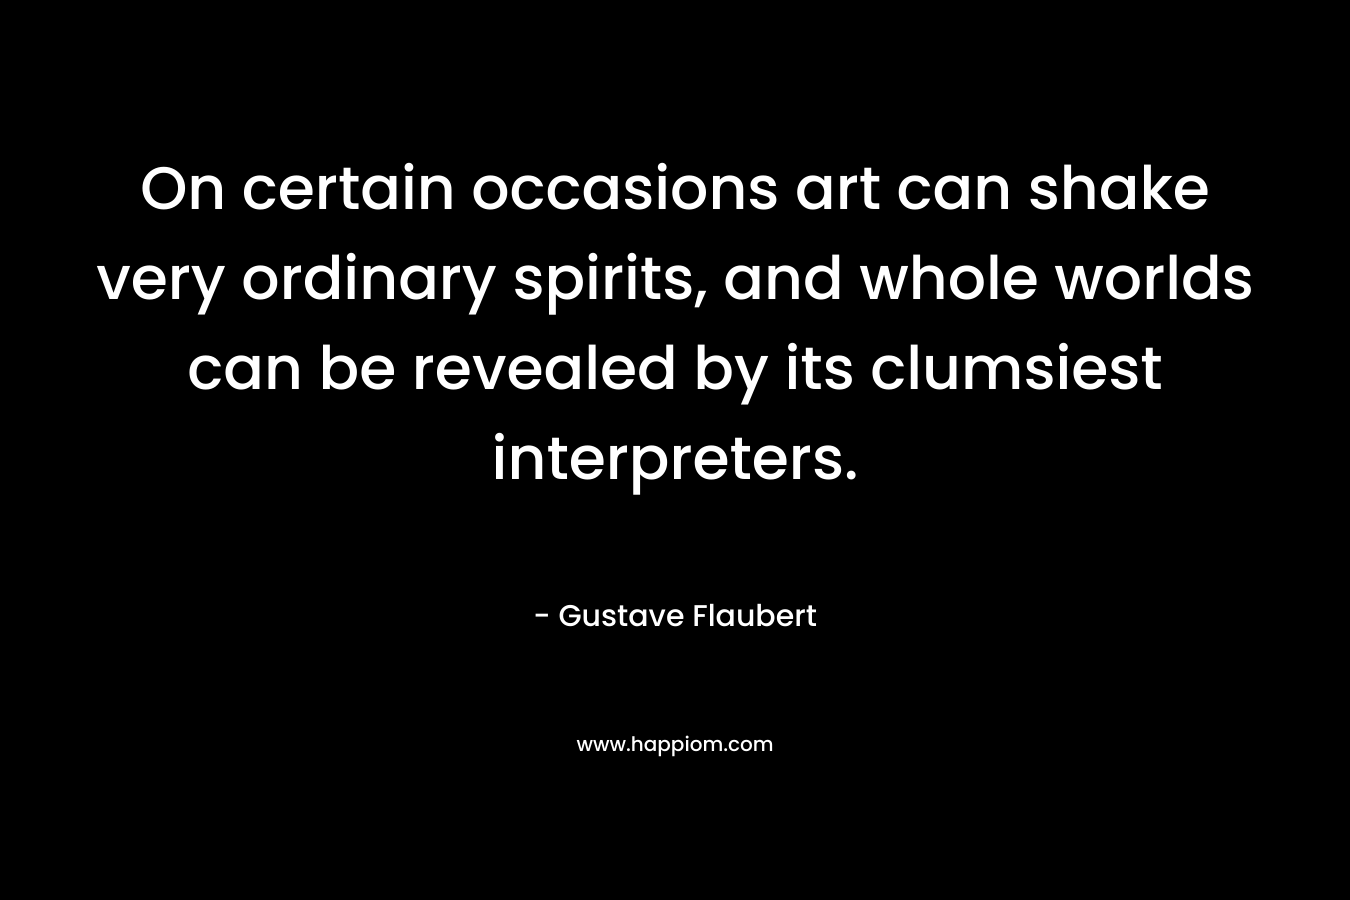 On certain occasions art can shake very ordinary spirits, and whole worlds can be revealed by its clumsiest interpreters. – Gustave Flaubert